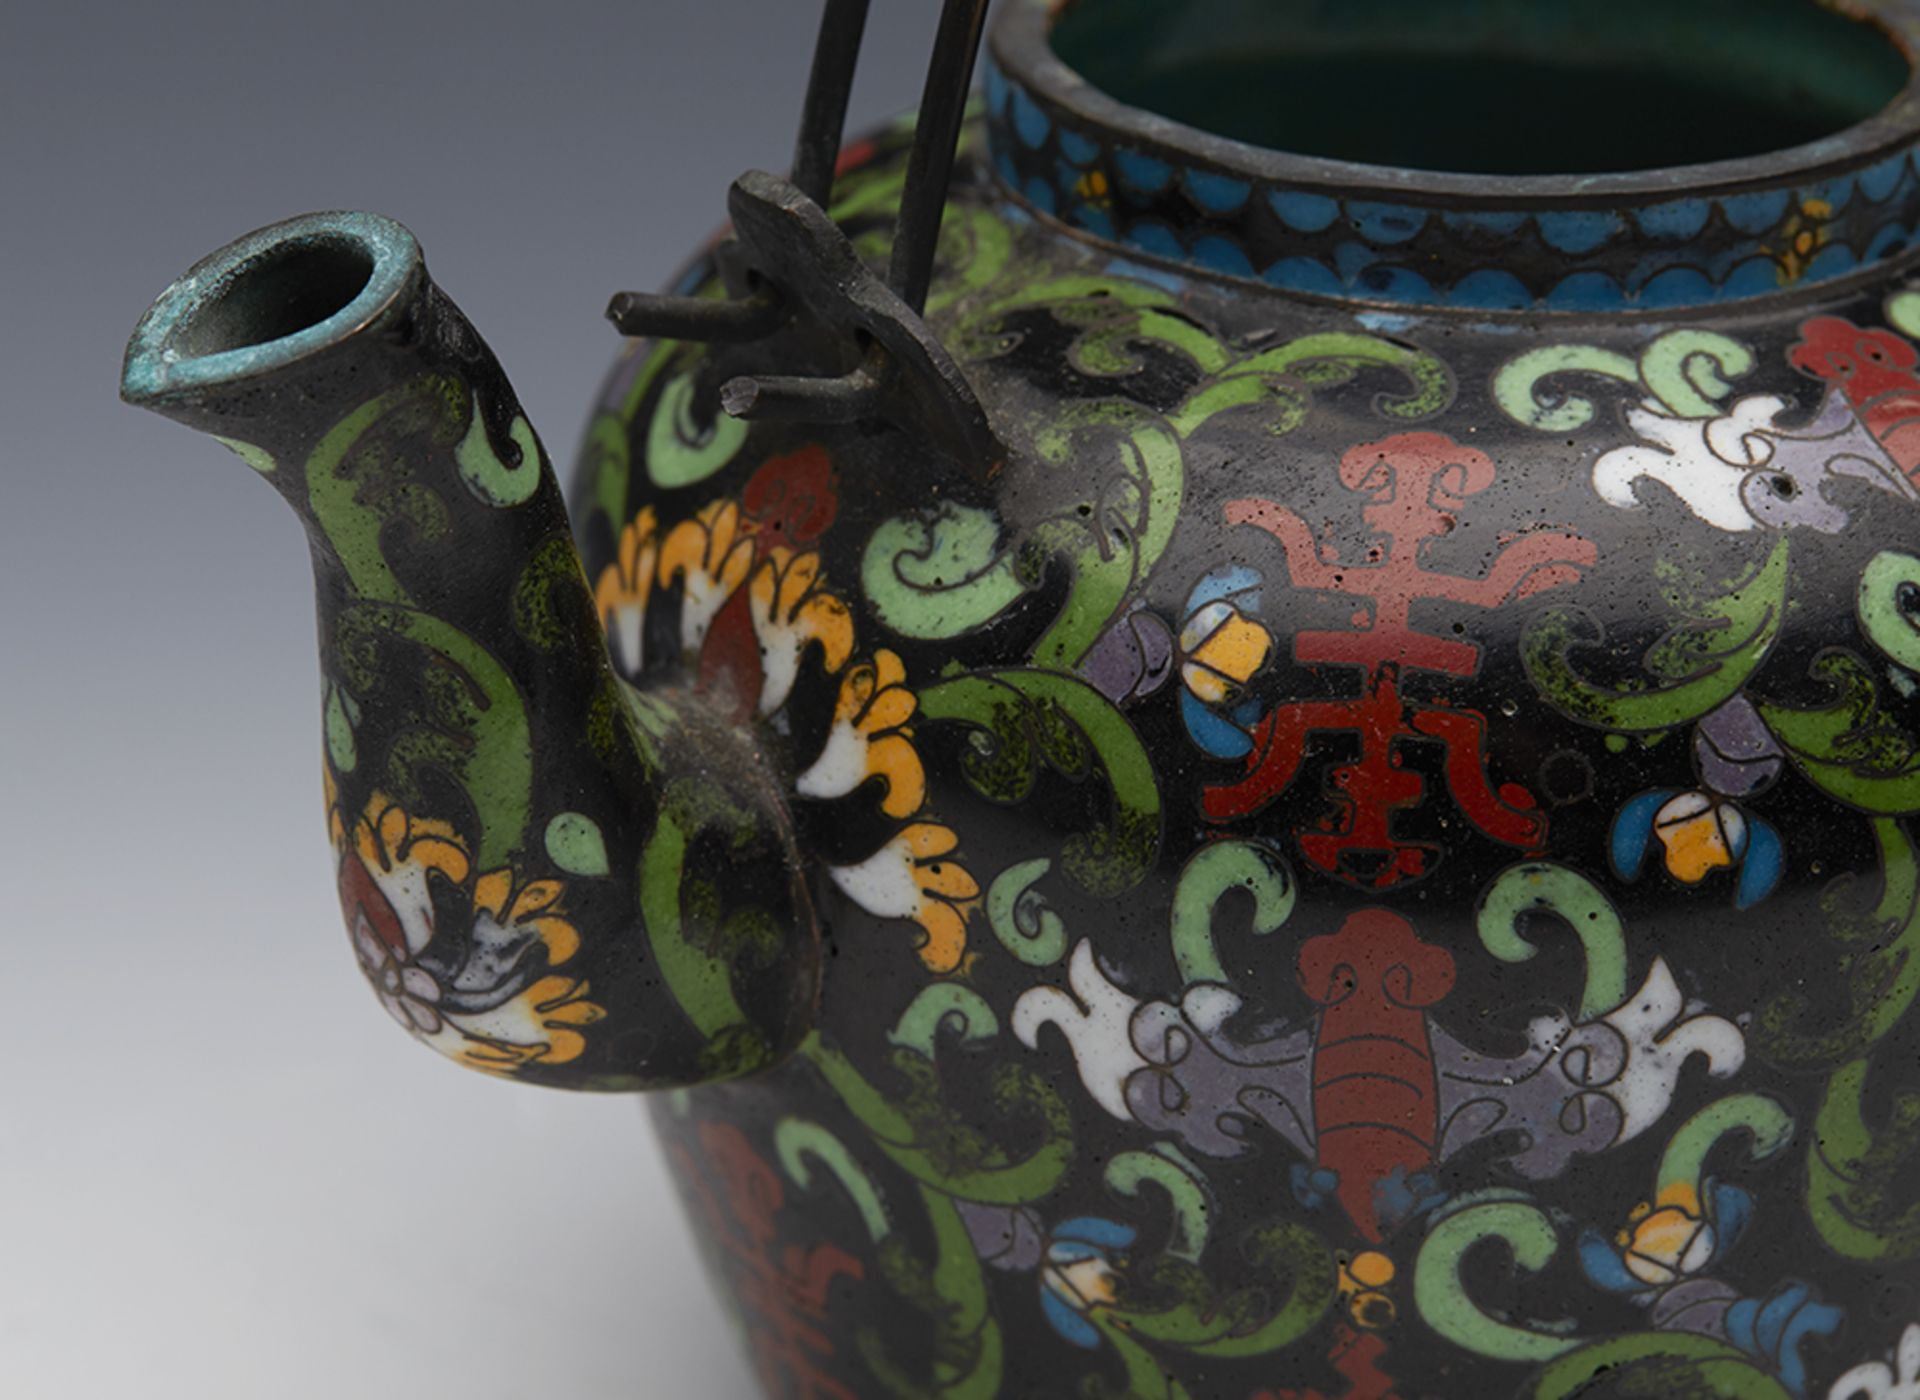 Fine Antique Chinese Qing Cloisonne Wine Pot Marked Tong Shun Tang 19Th C. - Image 2 of 10